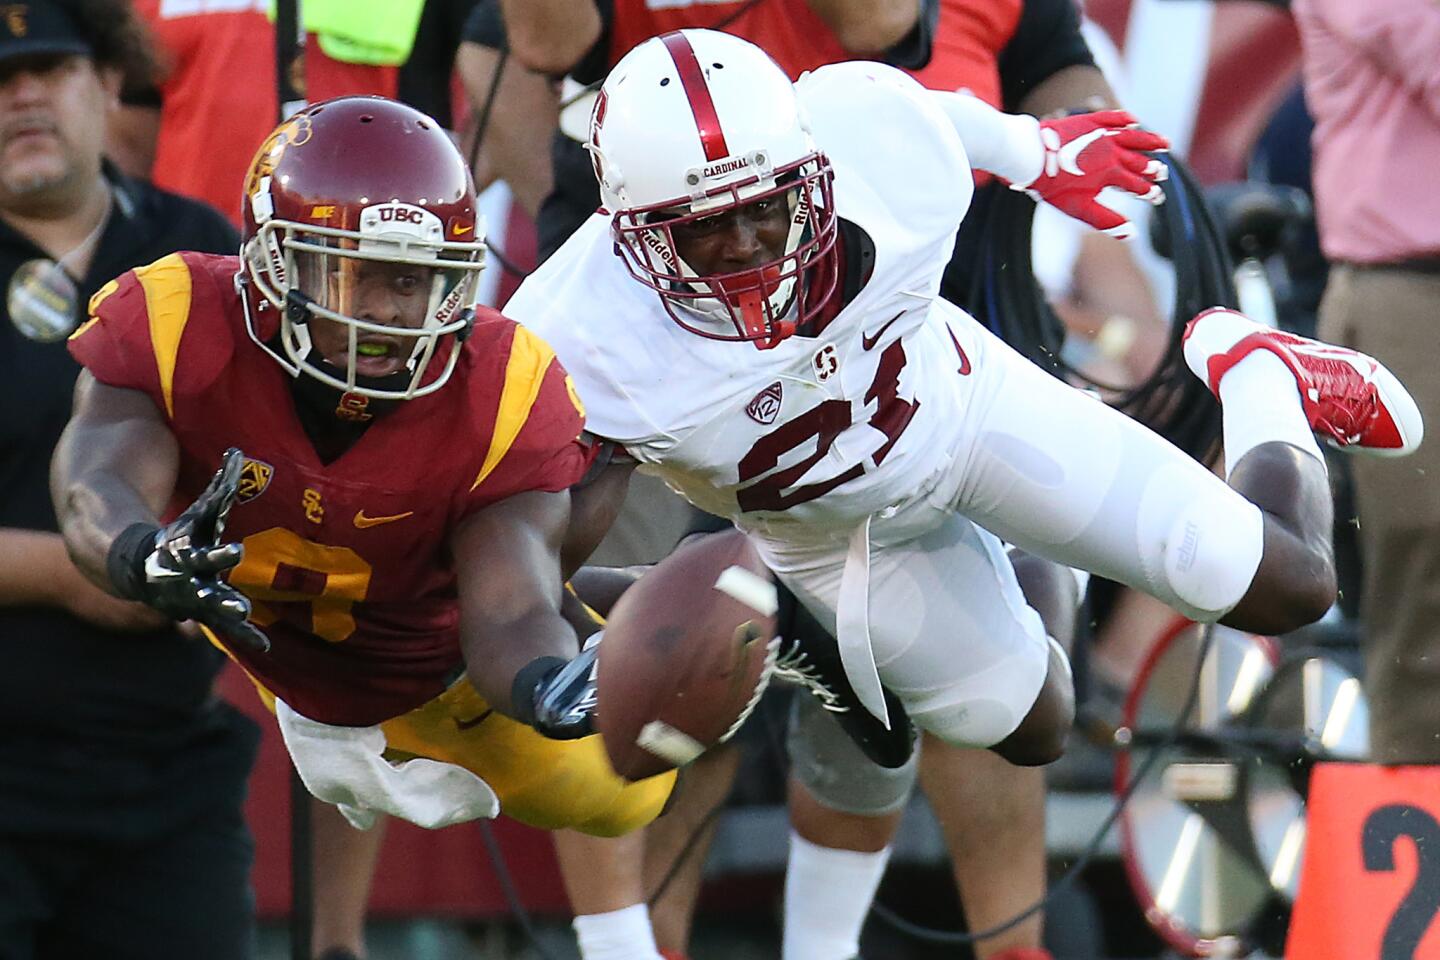 USC receiver JuJu Smith-Schuster can't reach a pass from Cody Kessler as he's defended by Stanford cornerback Ronnie Harris in the second half Saturday at the Coliseum.